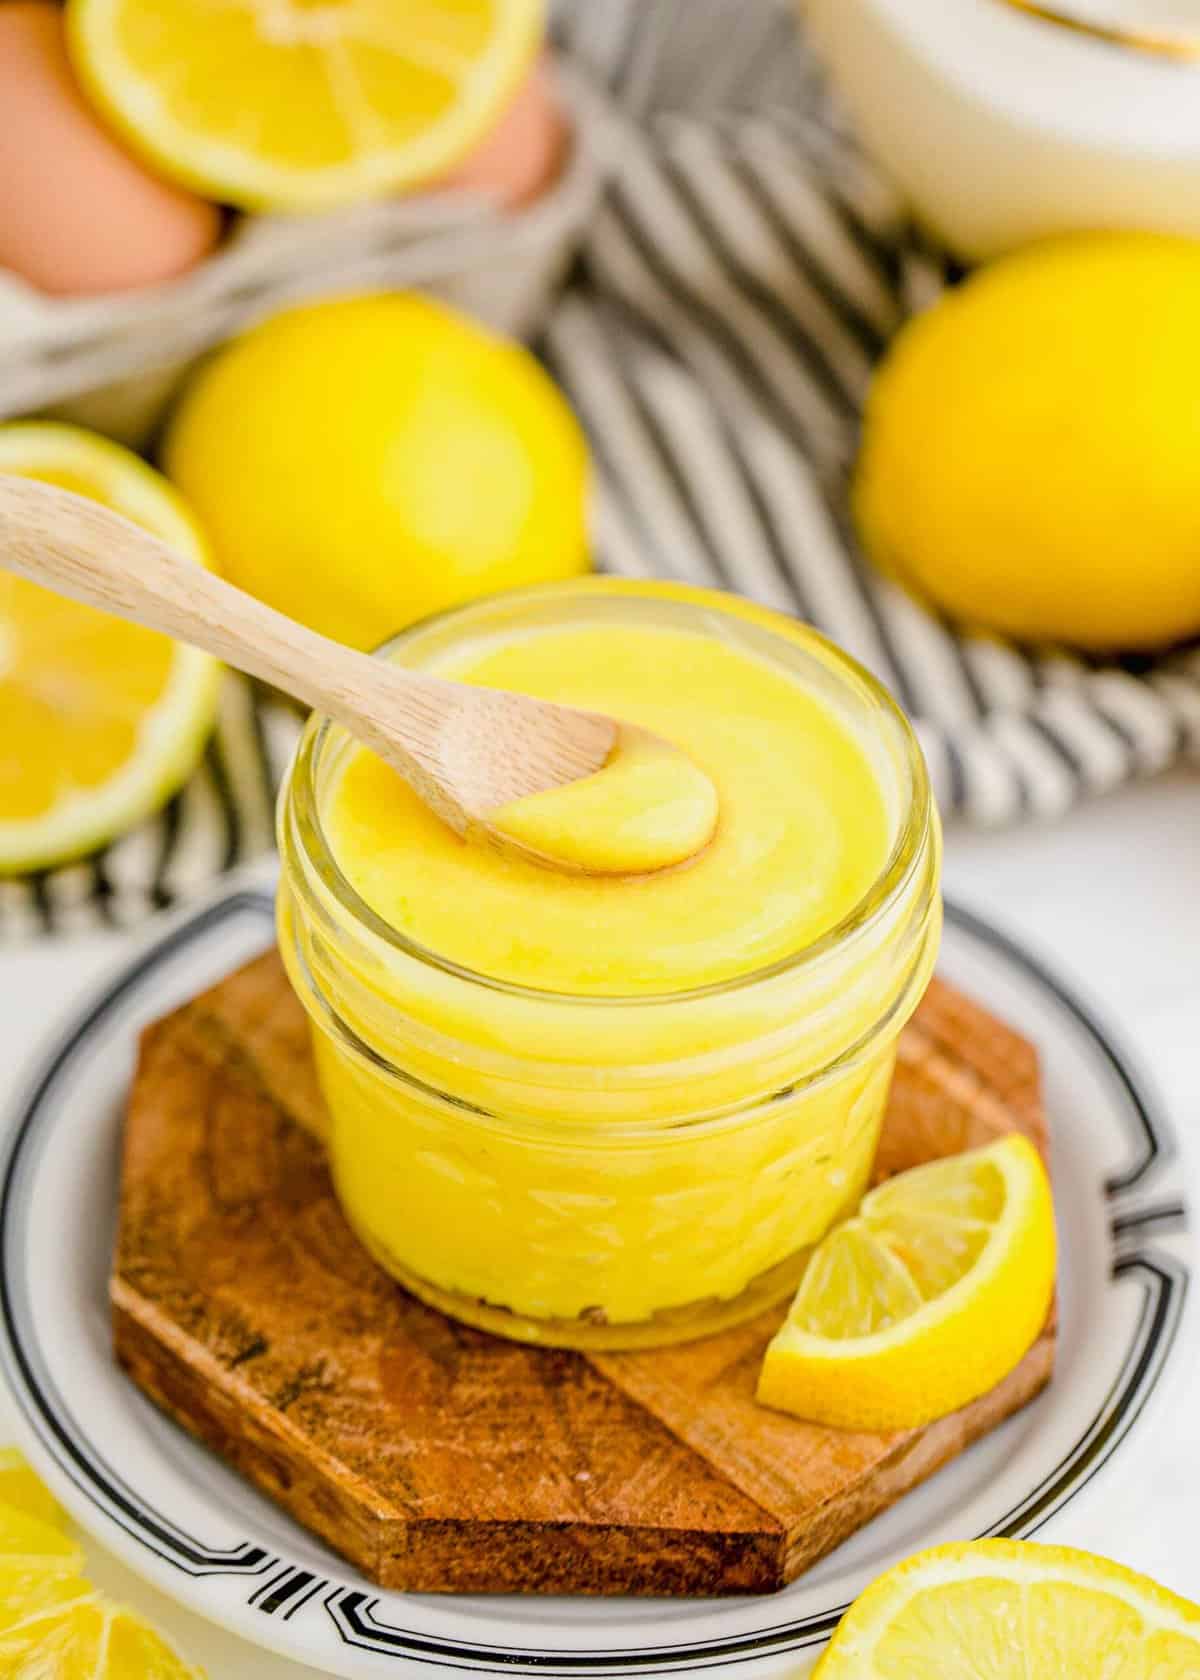 Jar of lemon curd with spoon, with fresh lemons in background